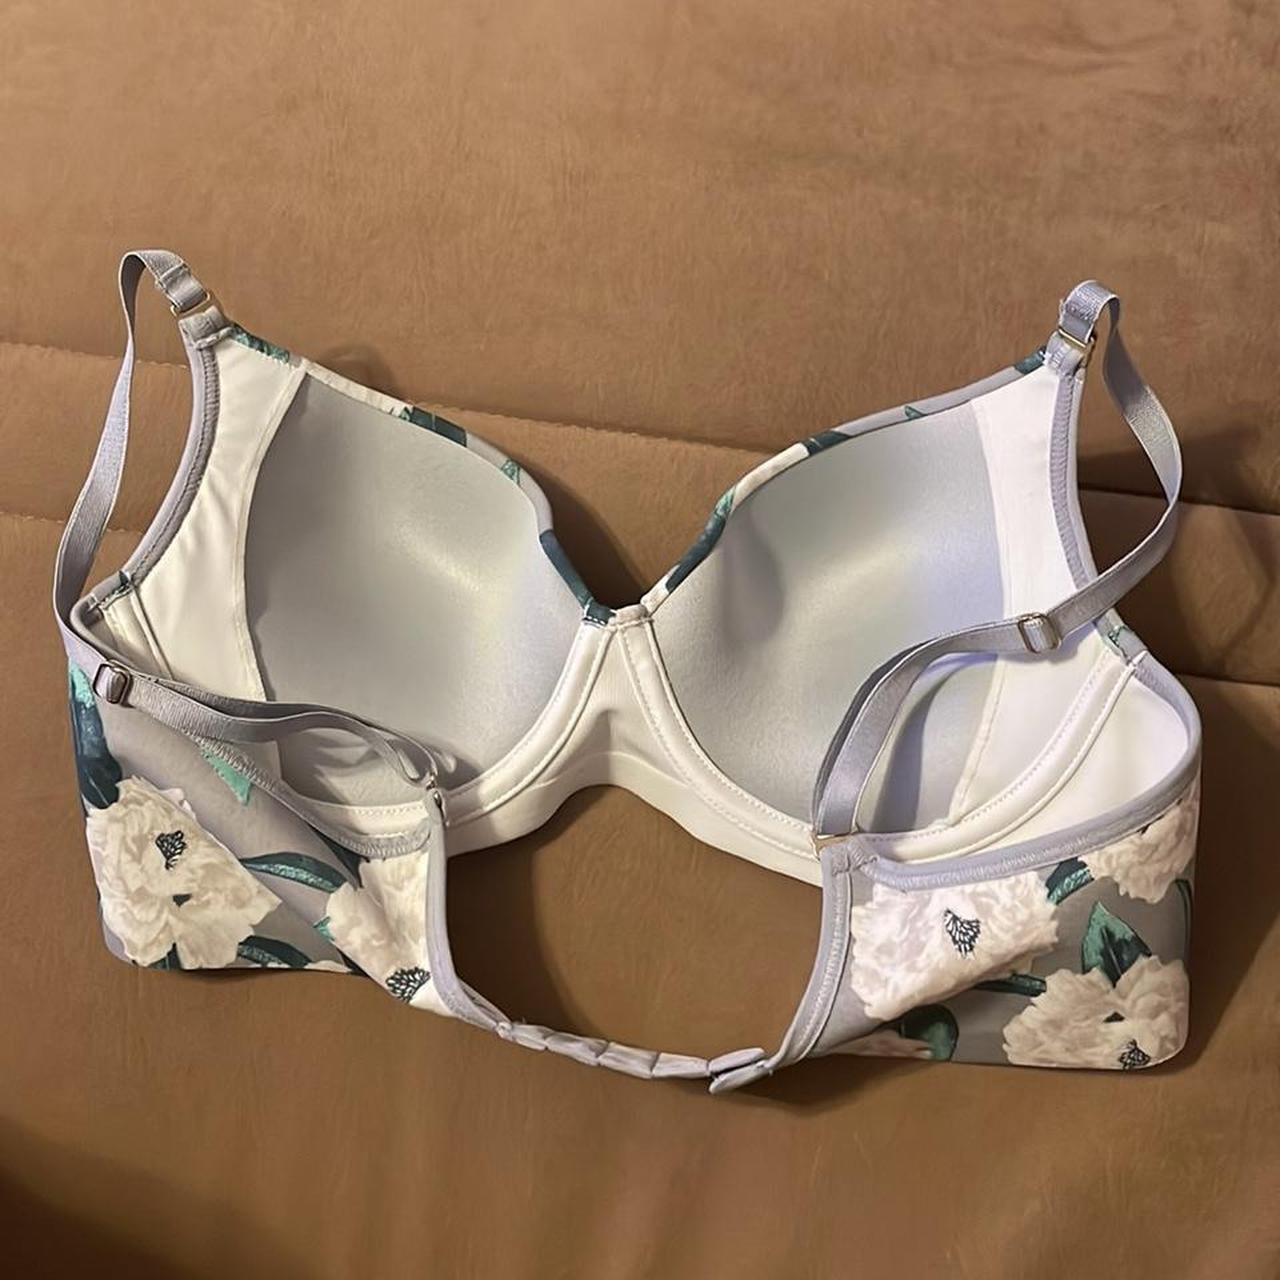 Product Image 2 - Leonisa Floral Bra

Brand new, never